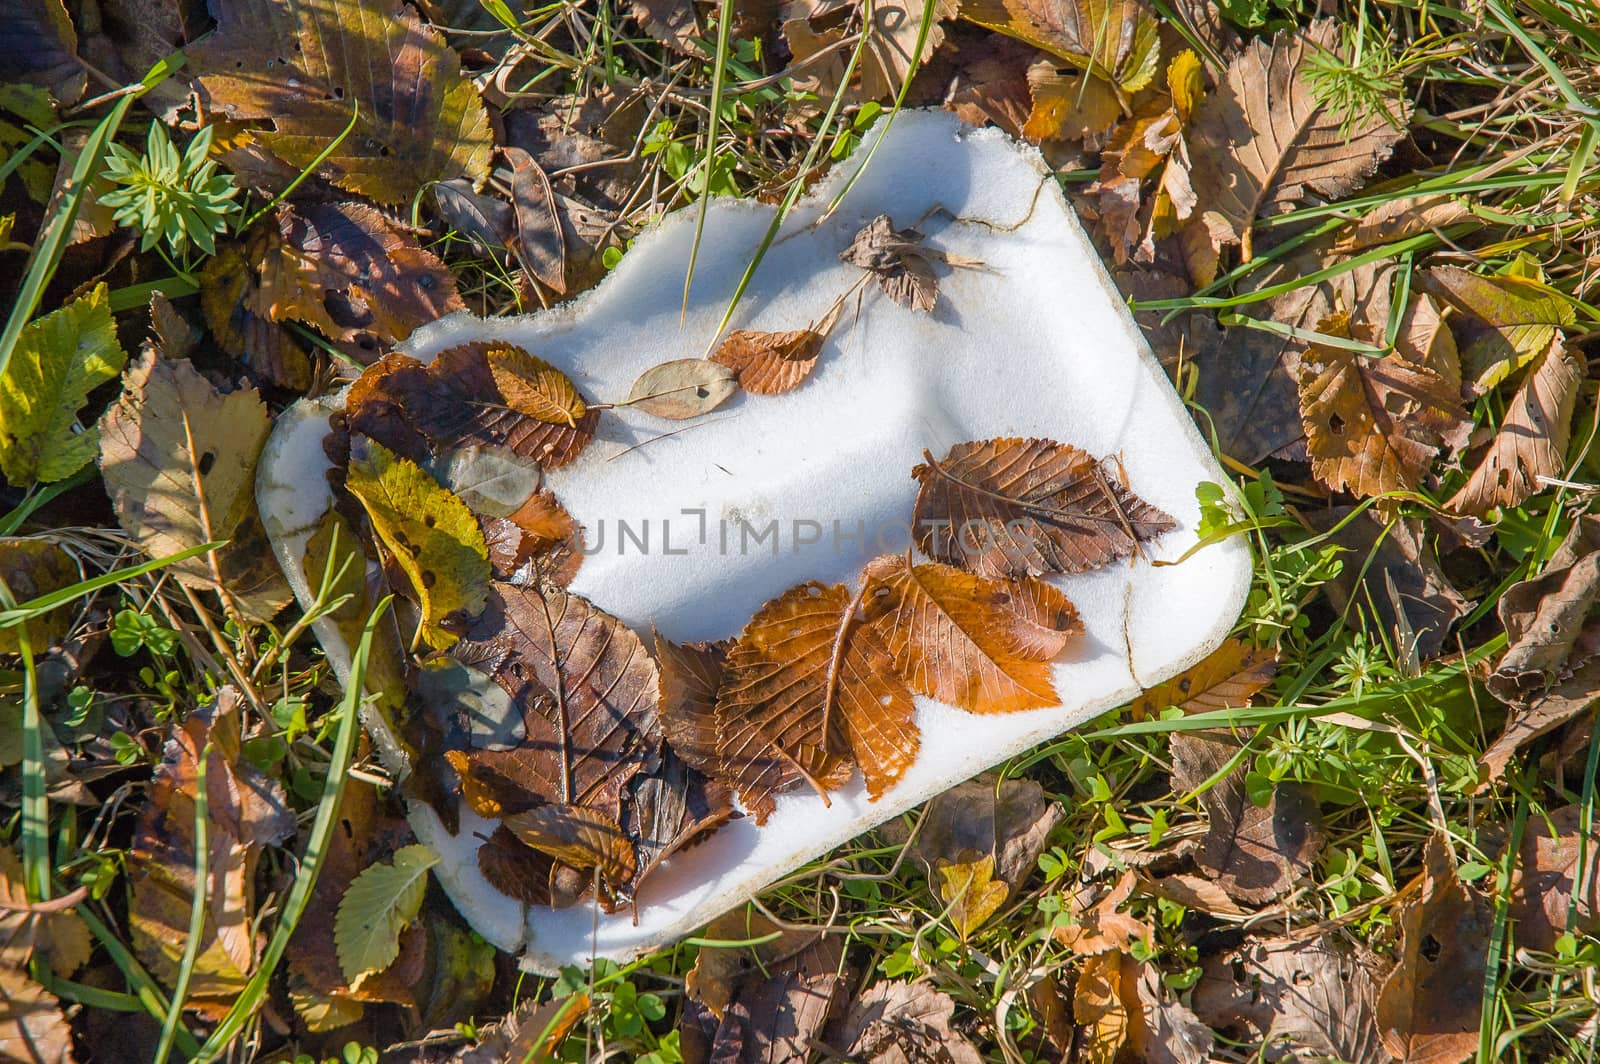 White foam tray left in Nature by disrespectful people. An example of pollution of the environment